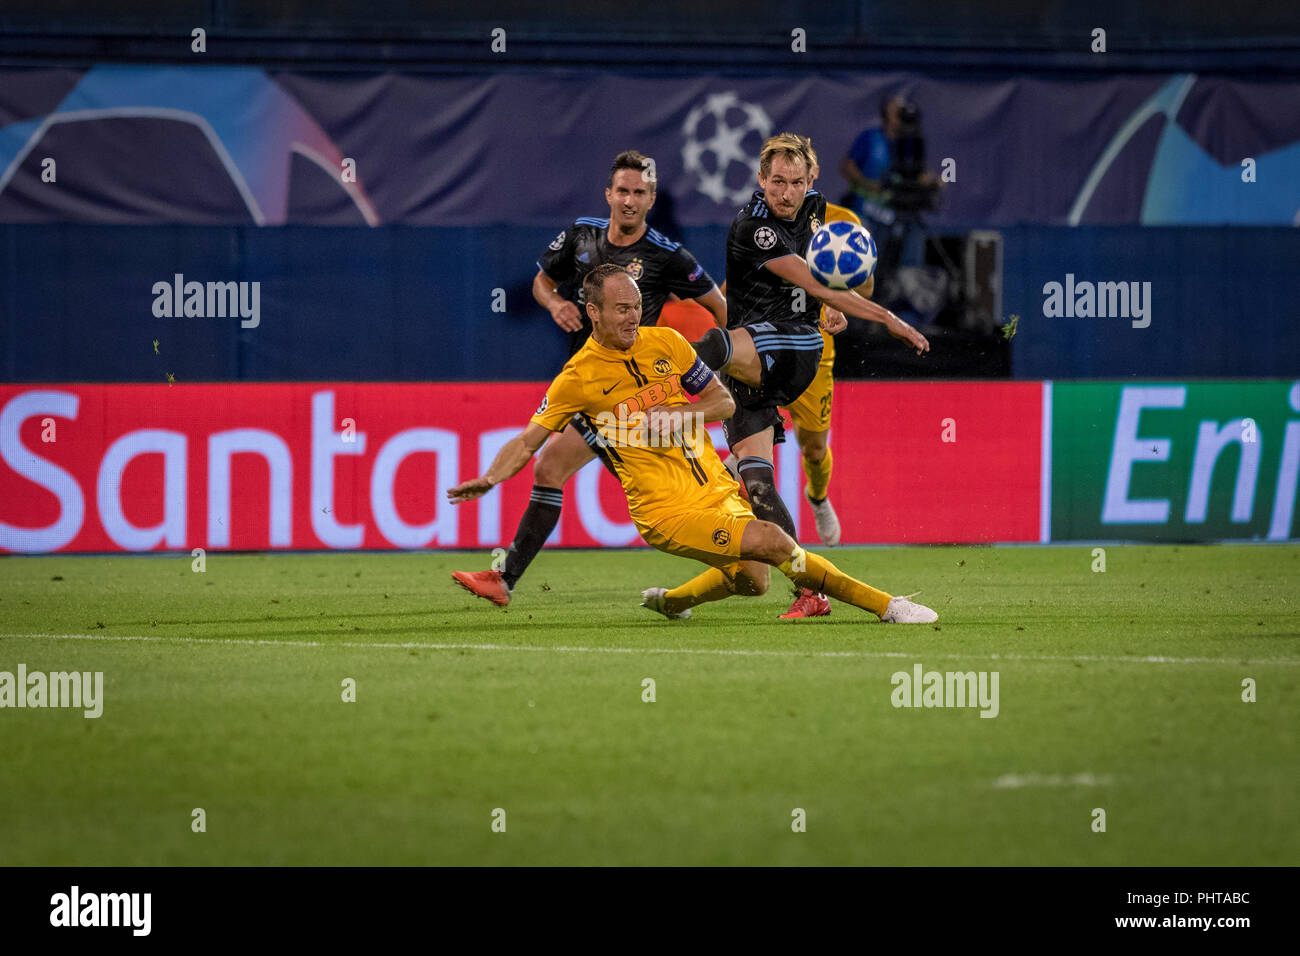 ZAGREB, CROATIA - AUGUST 28, 2018: UEFA Champions League Playoffs, GNK Dinamo vs. BSC Young Boys. In action Izet HAJROVIC (8) Stock Photo